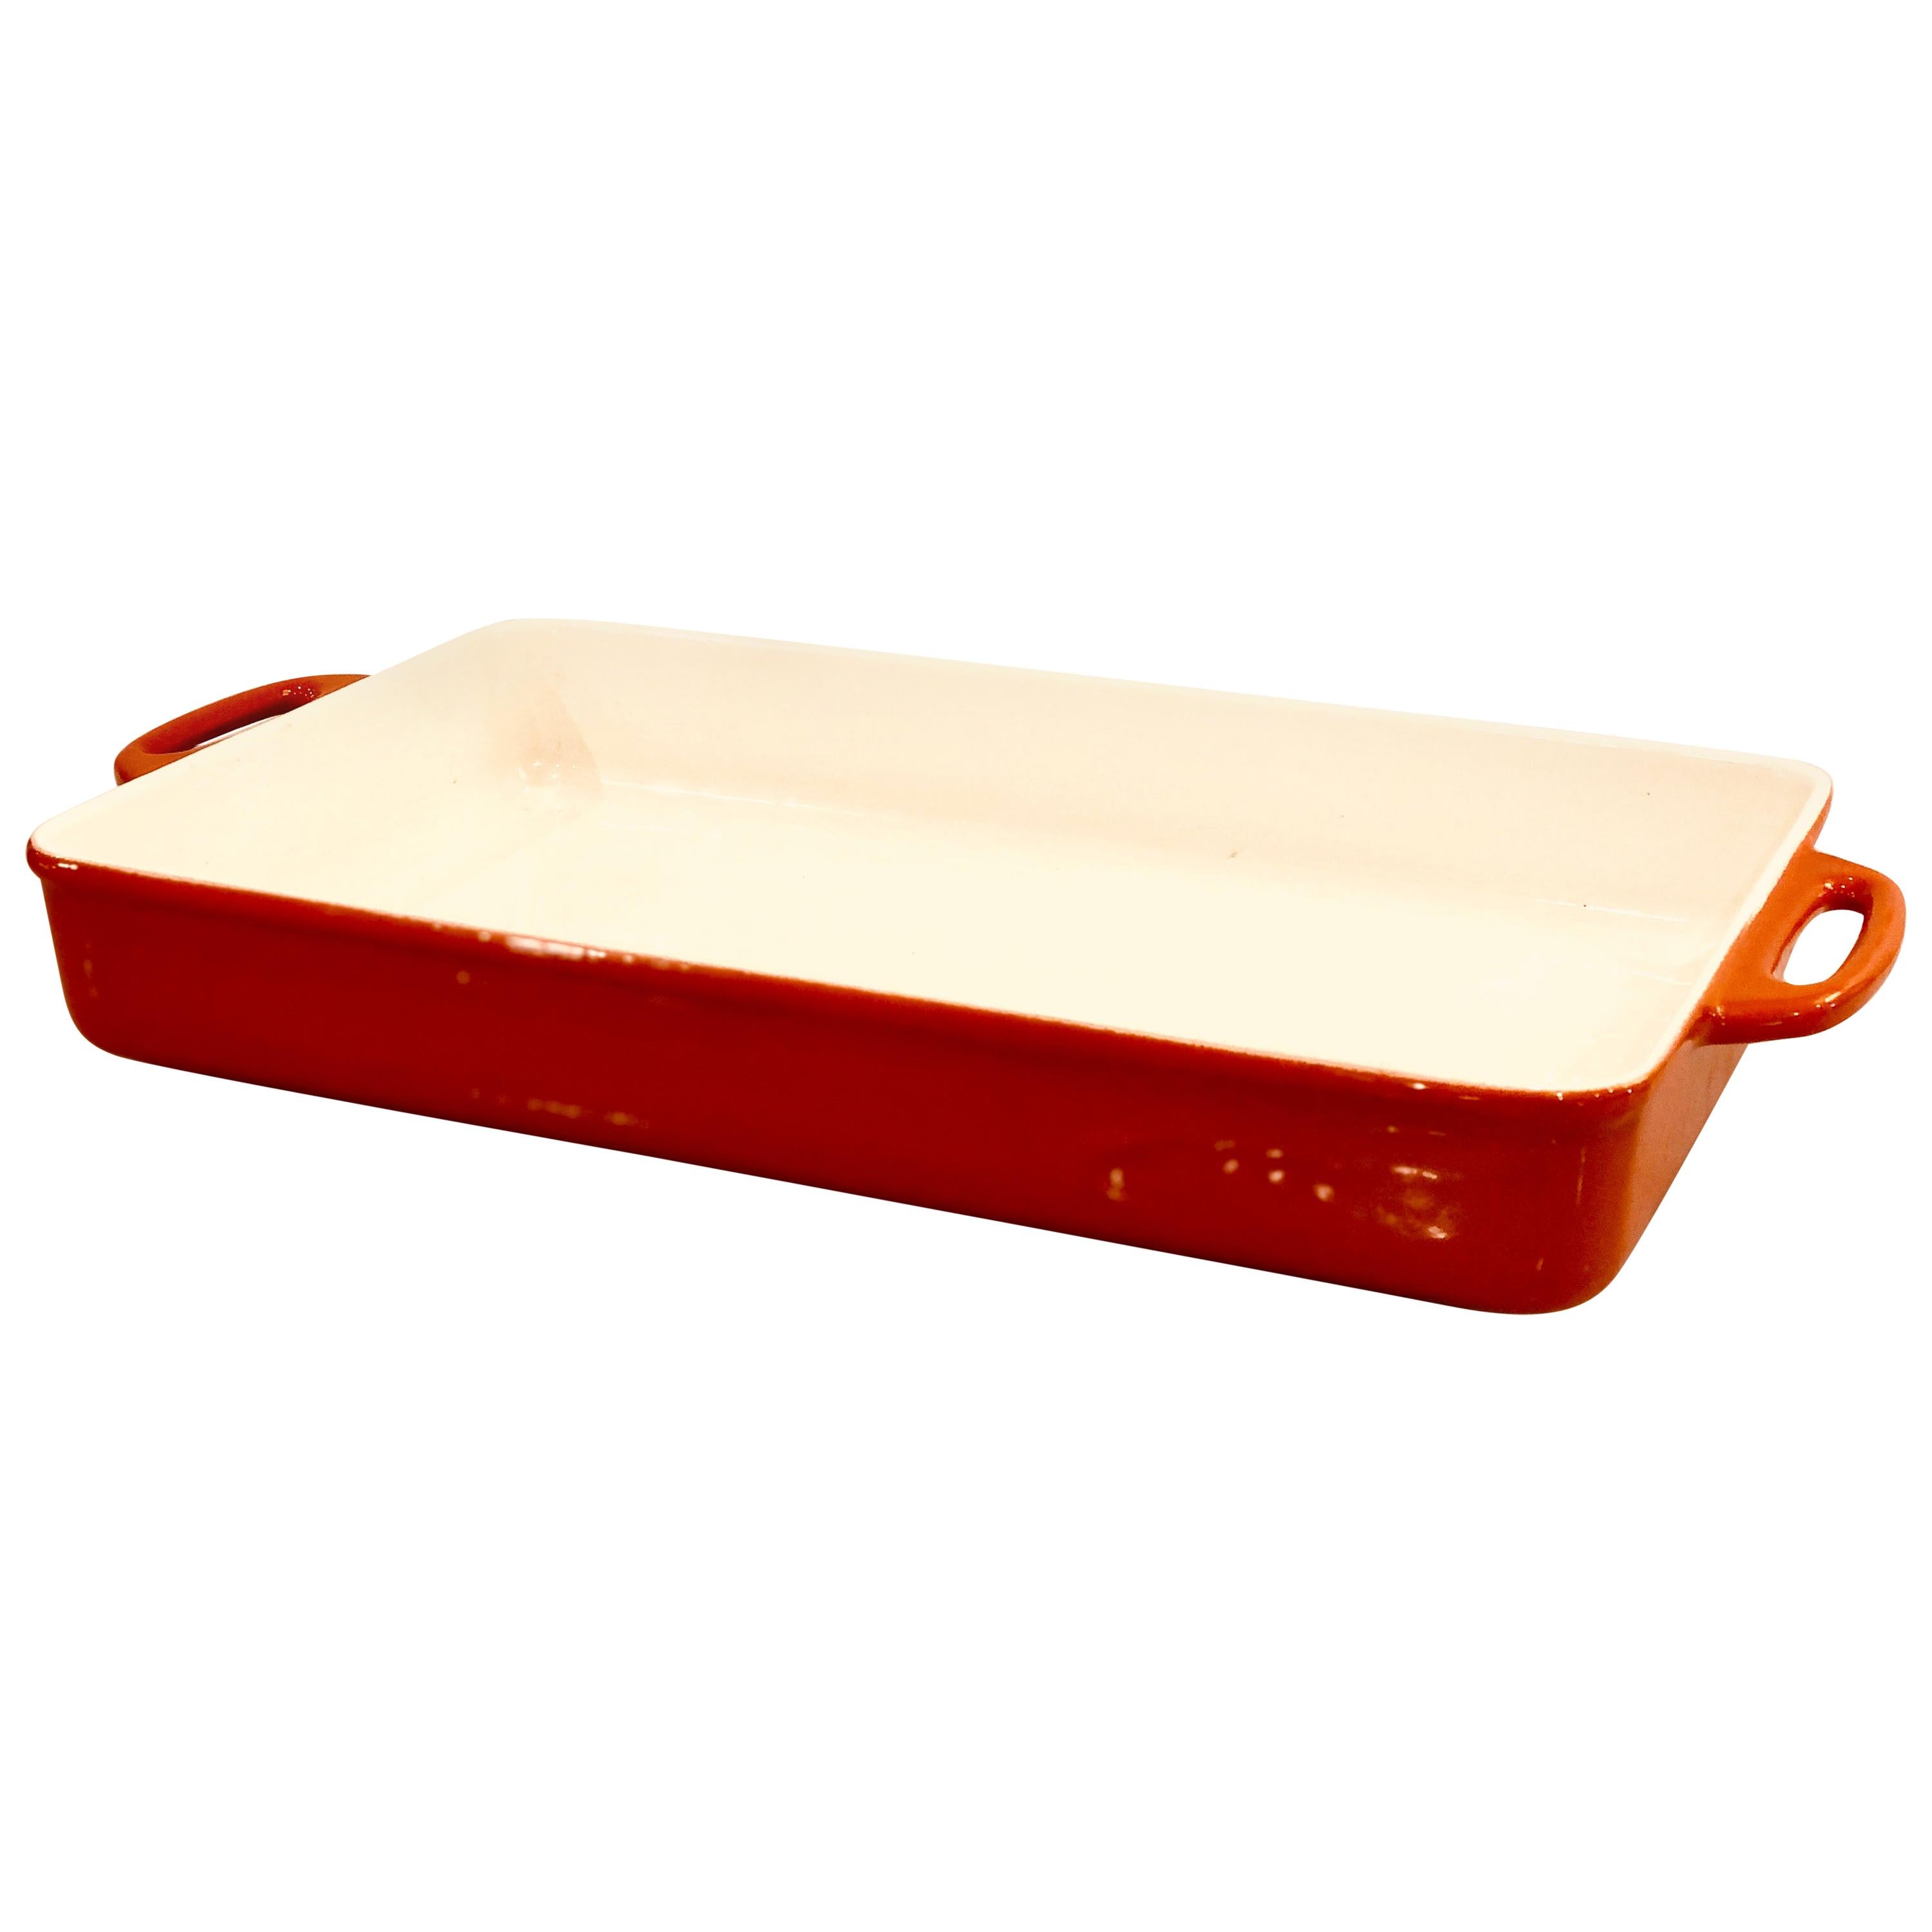 Orange Enameled Cookware Casserole by Copco Designed by Michael Lax For Sale